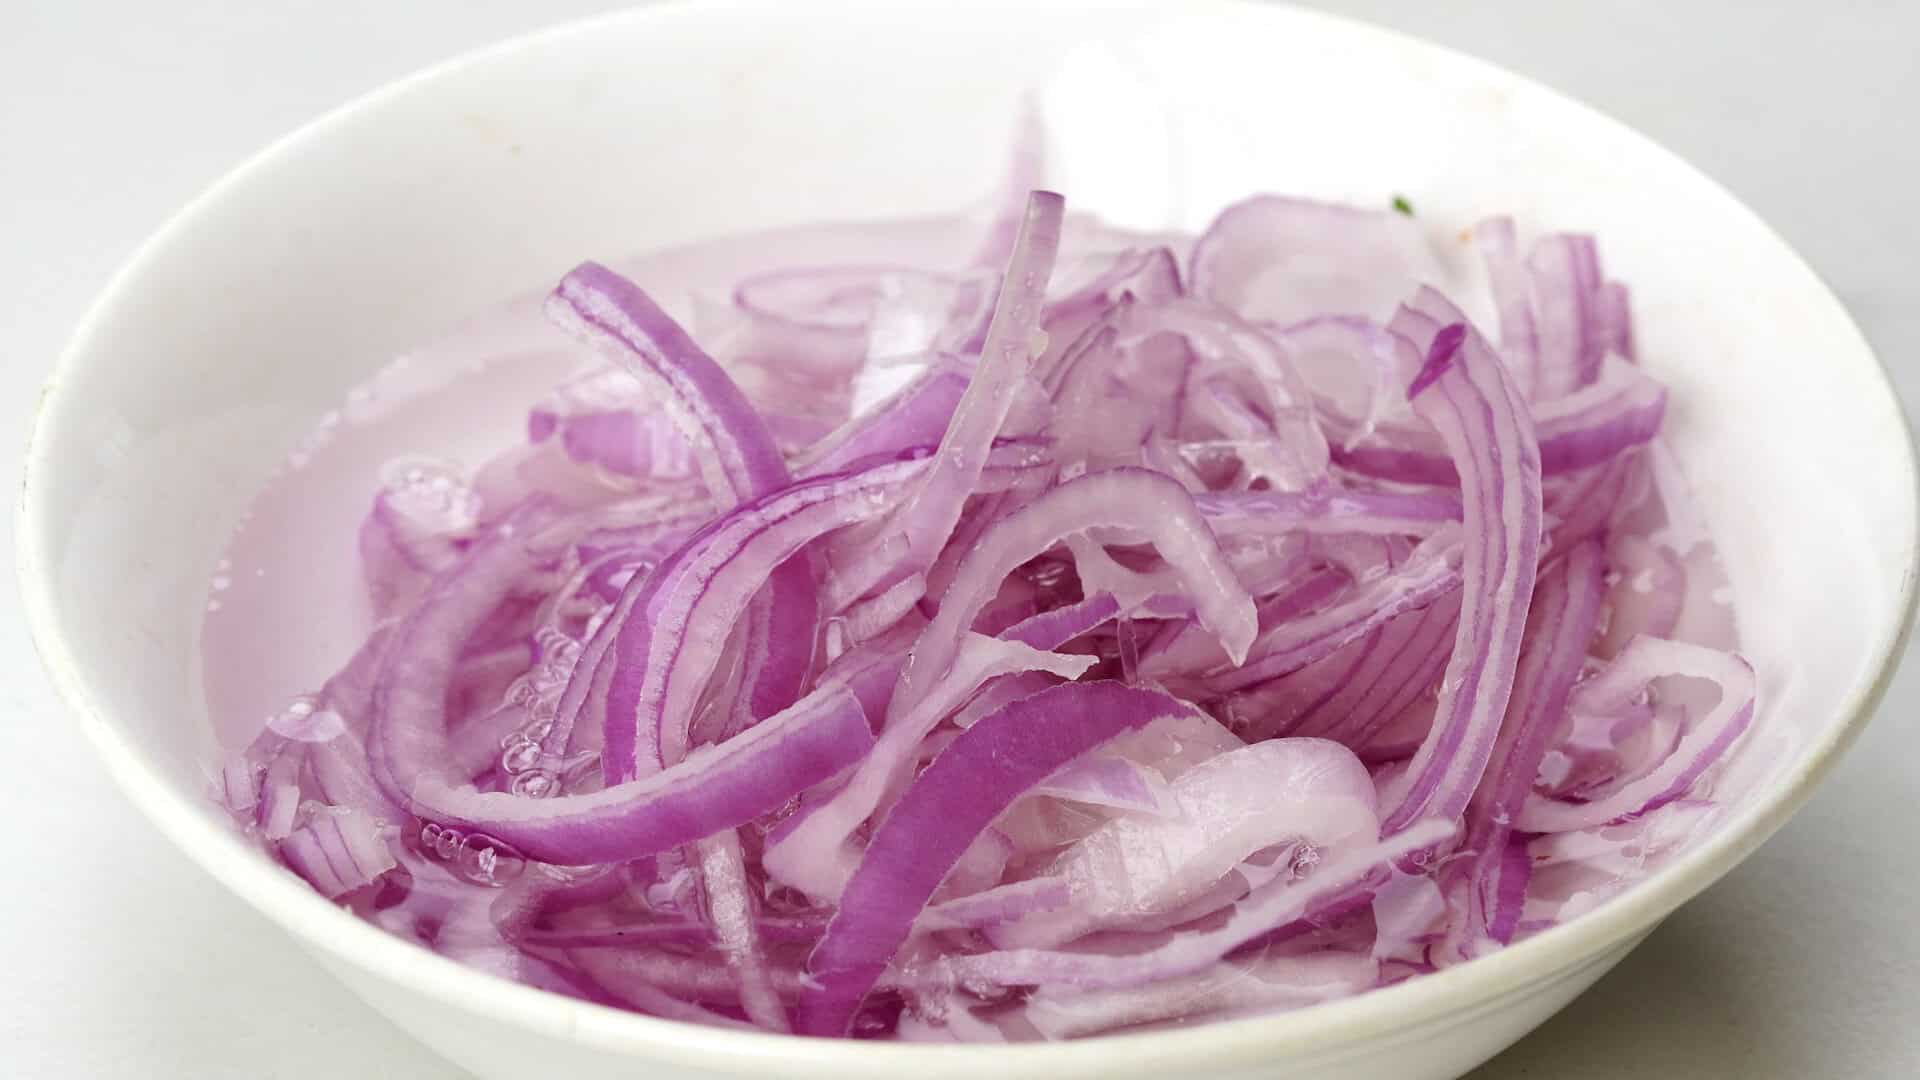 Soak sliced onion in ice cold water